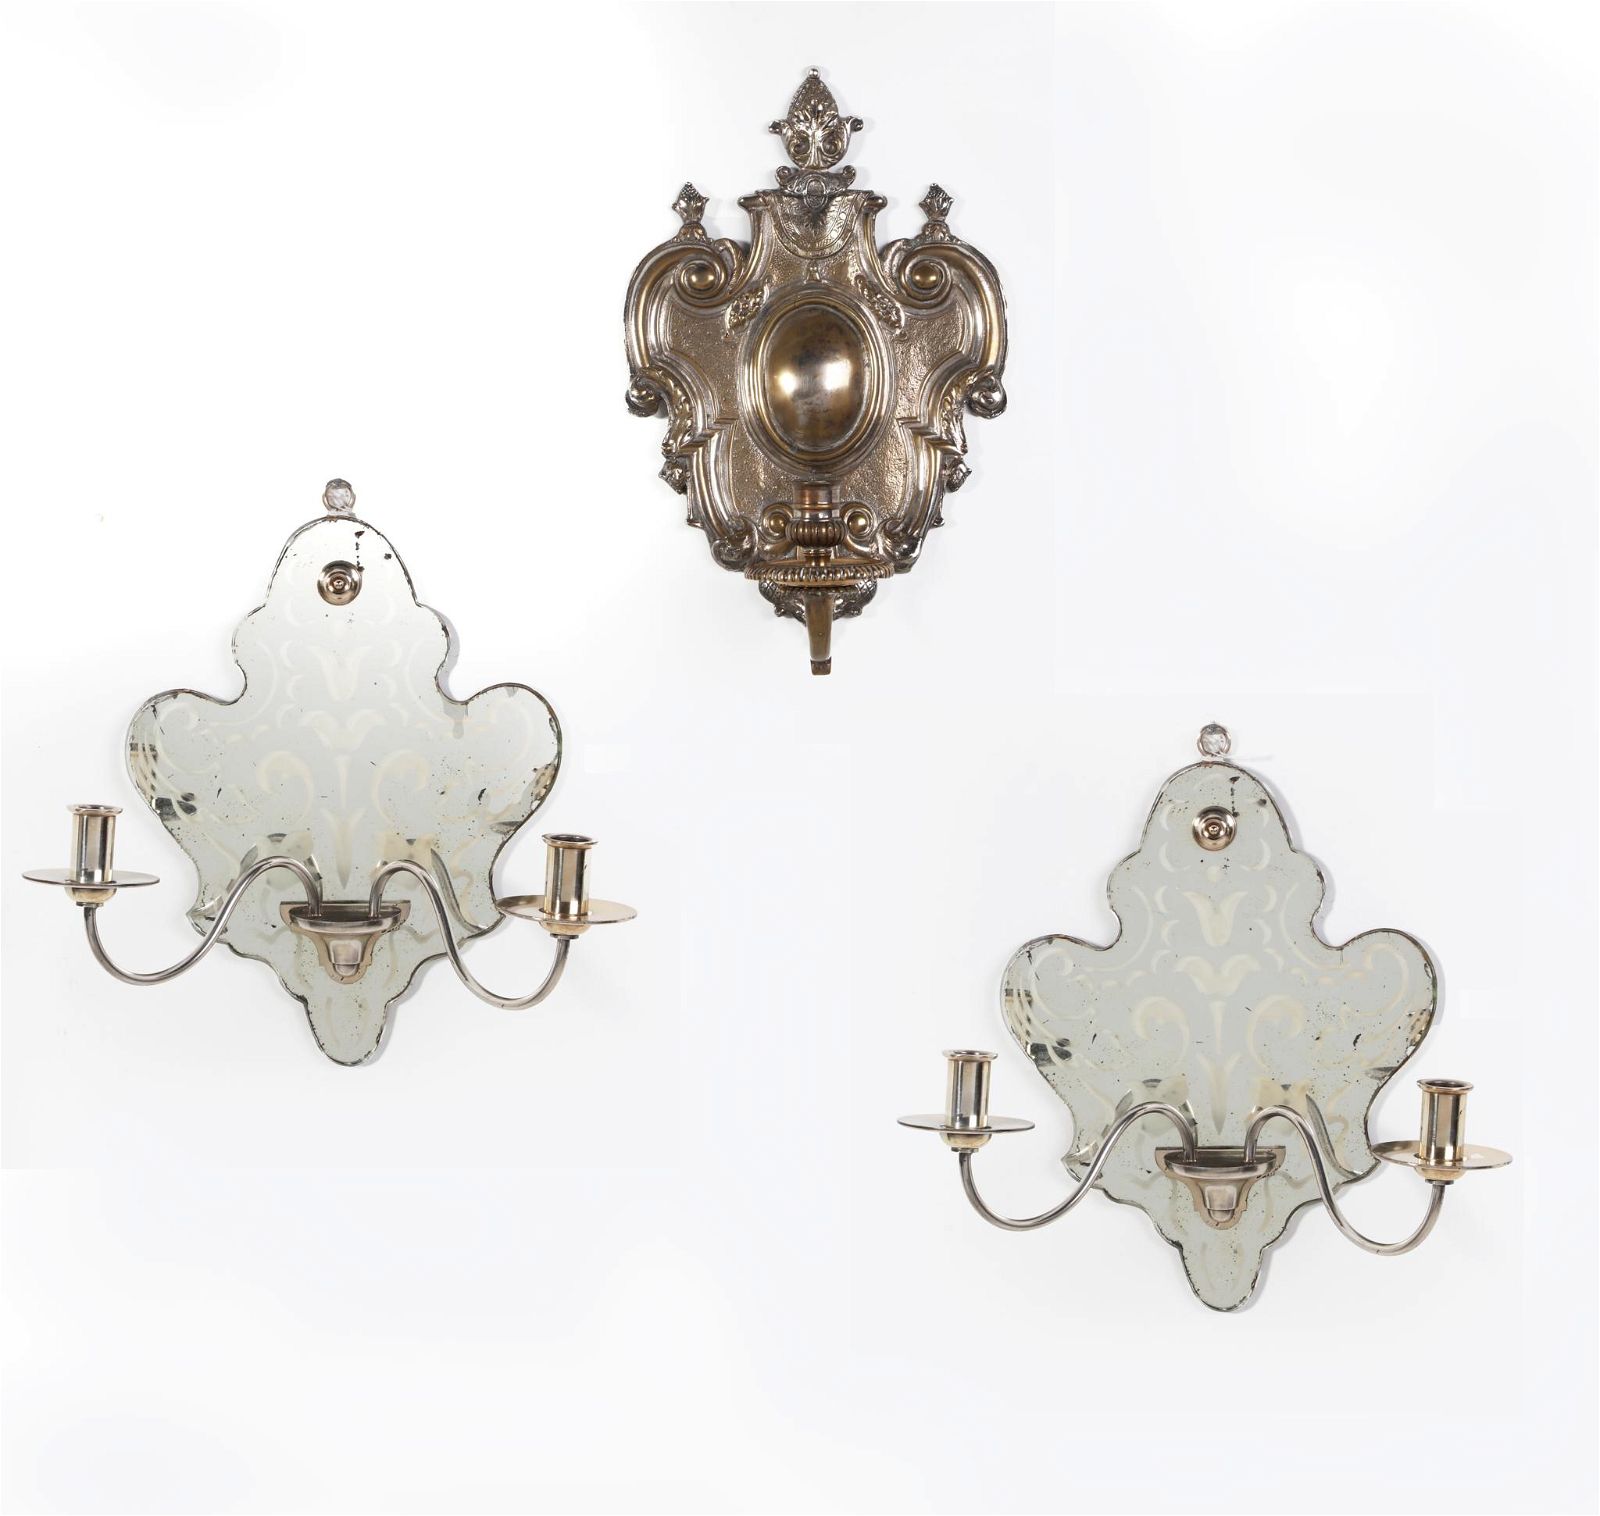 A PAIR OF BAROQUE STYLE WALL LIGHTS